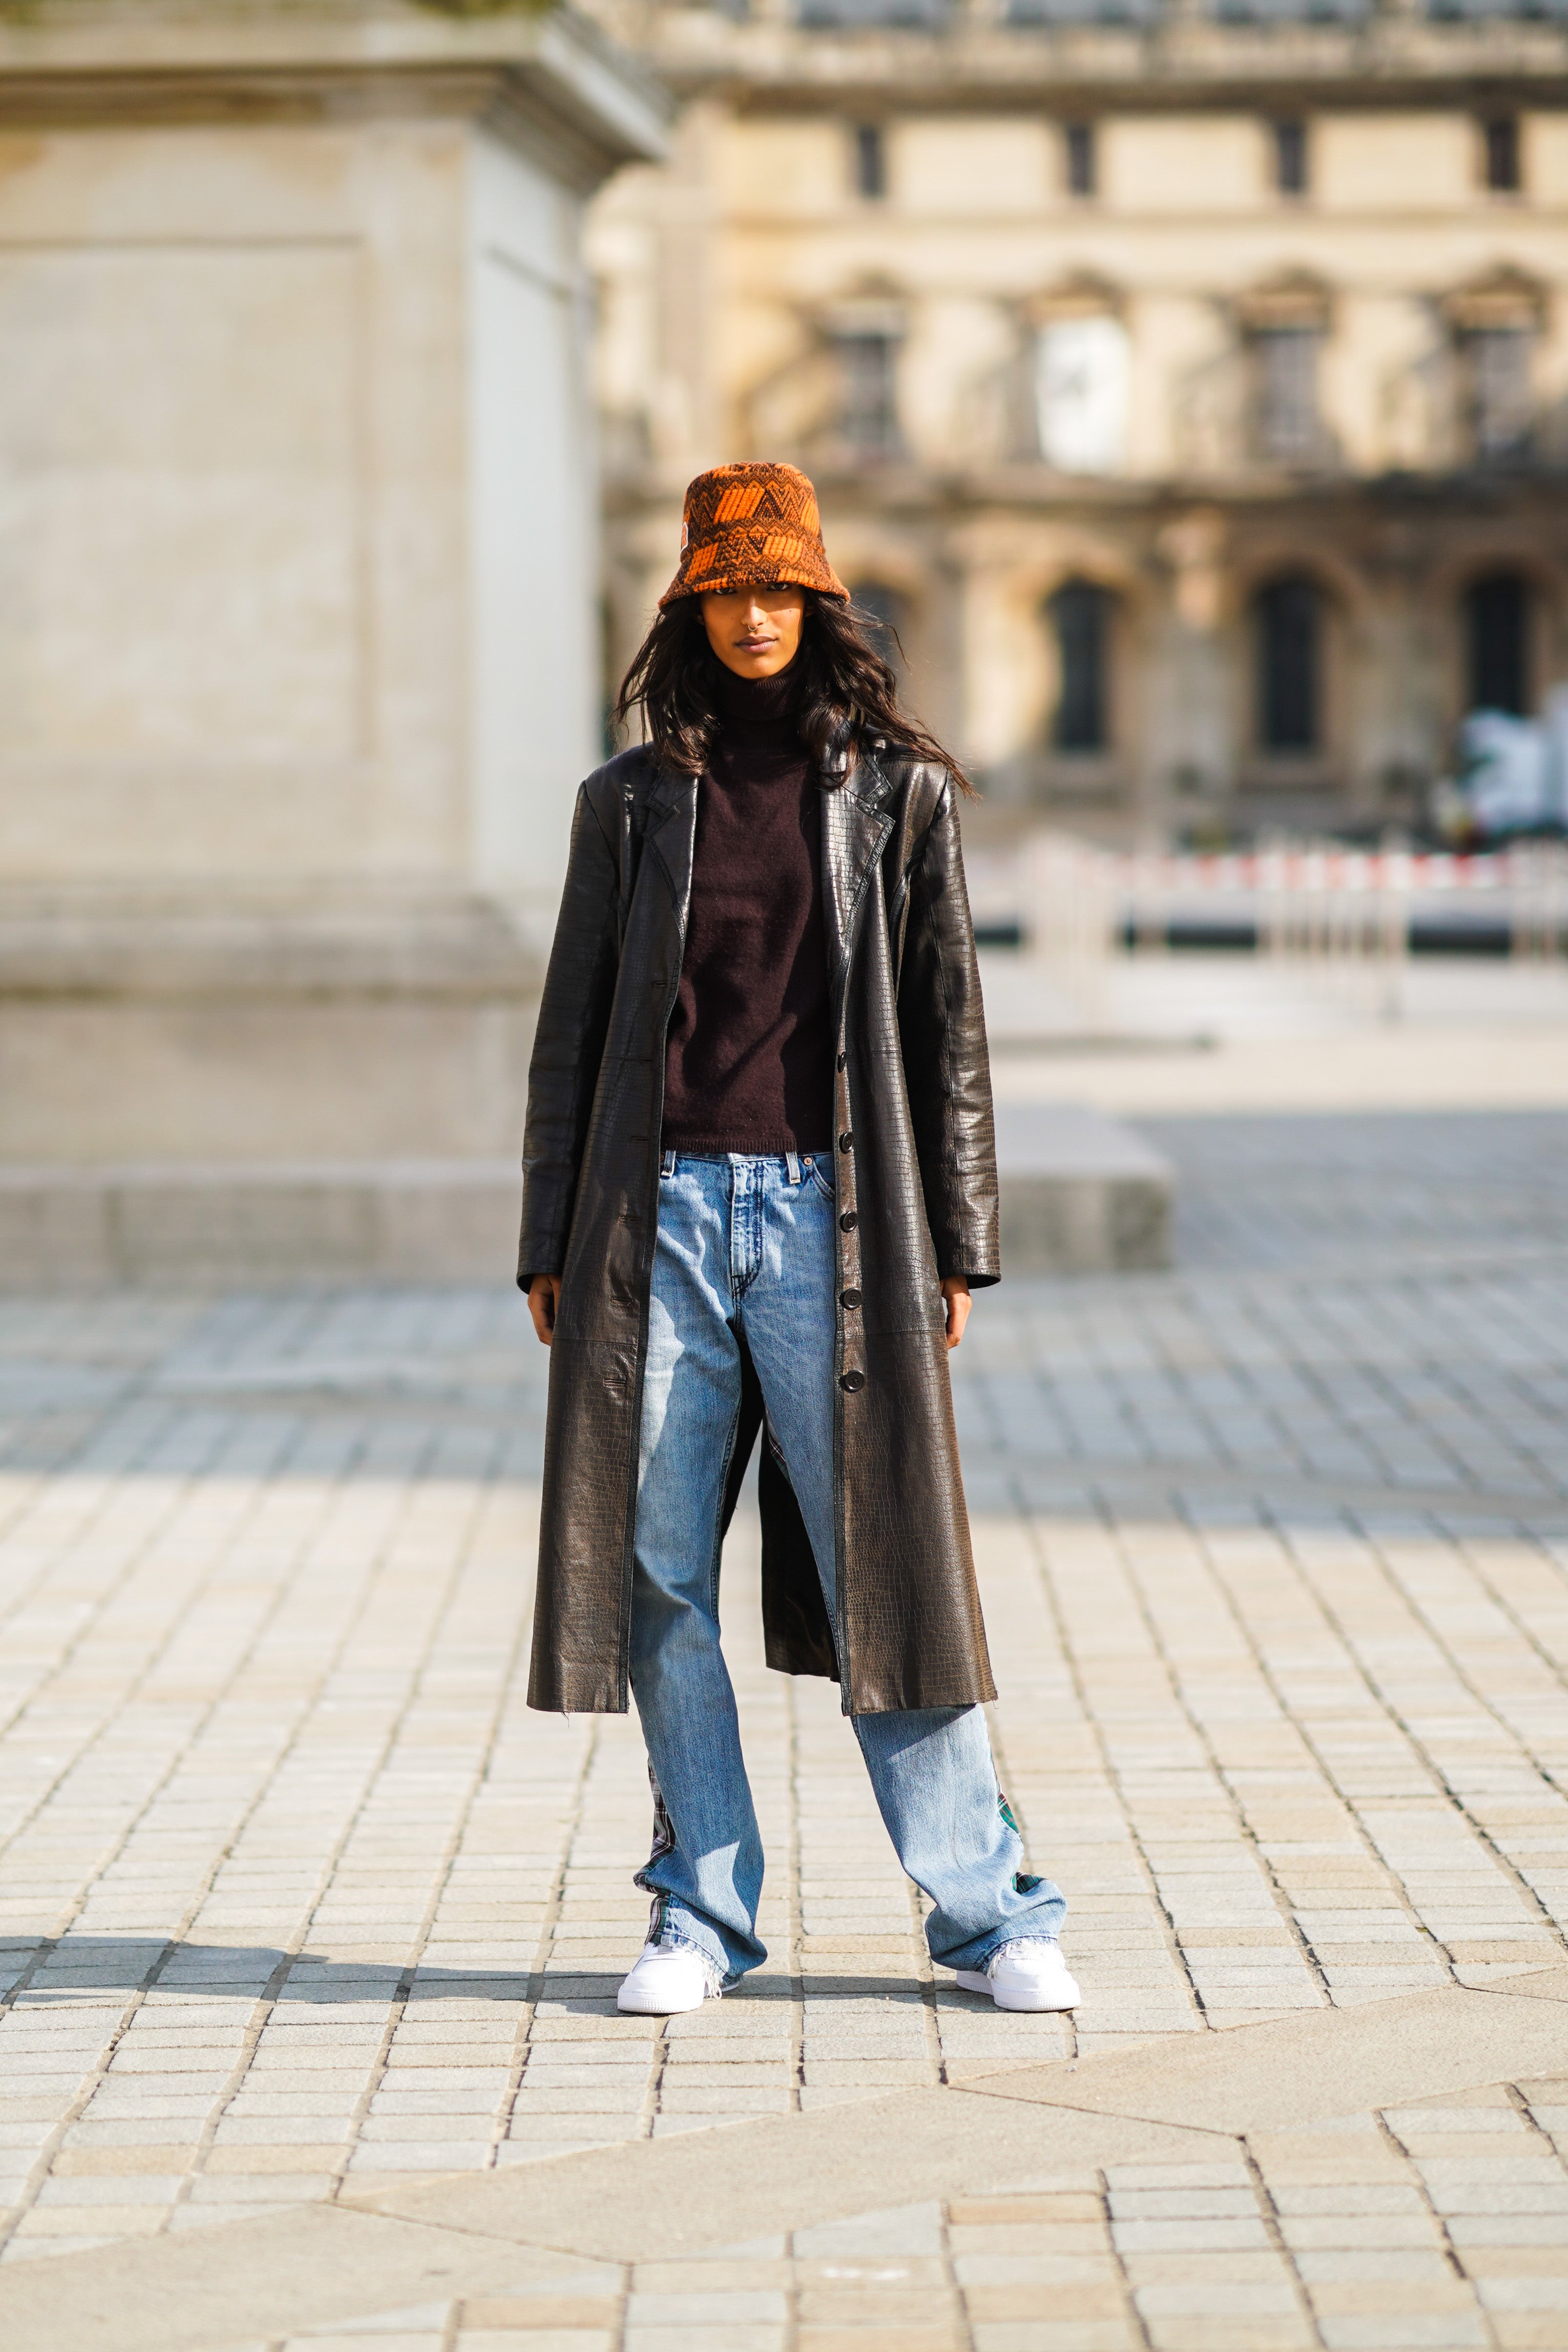 Baggy Jeans are the It Denim Silhouette for the Summer